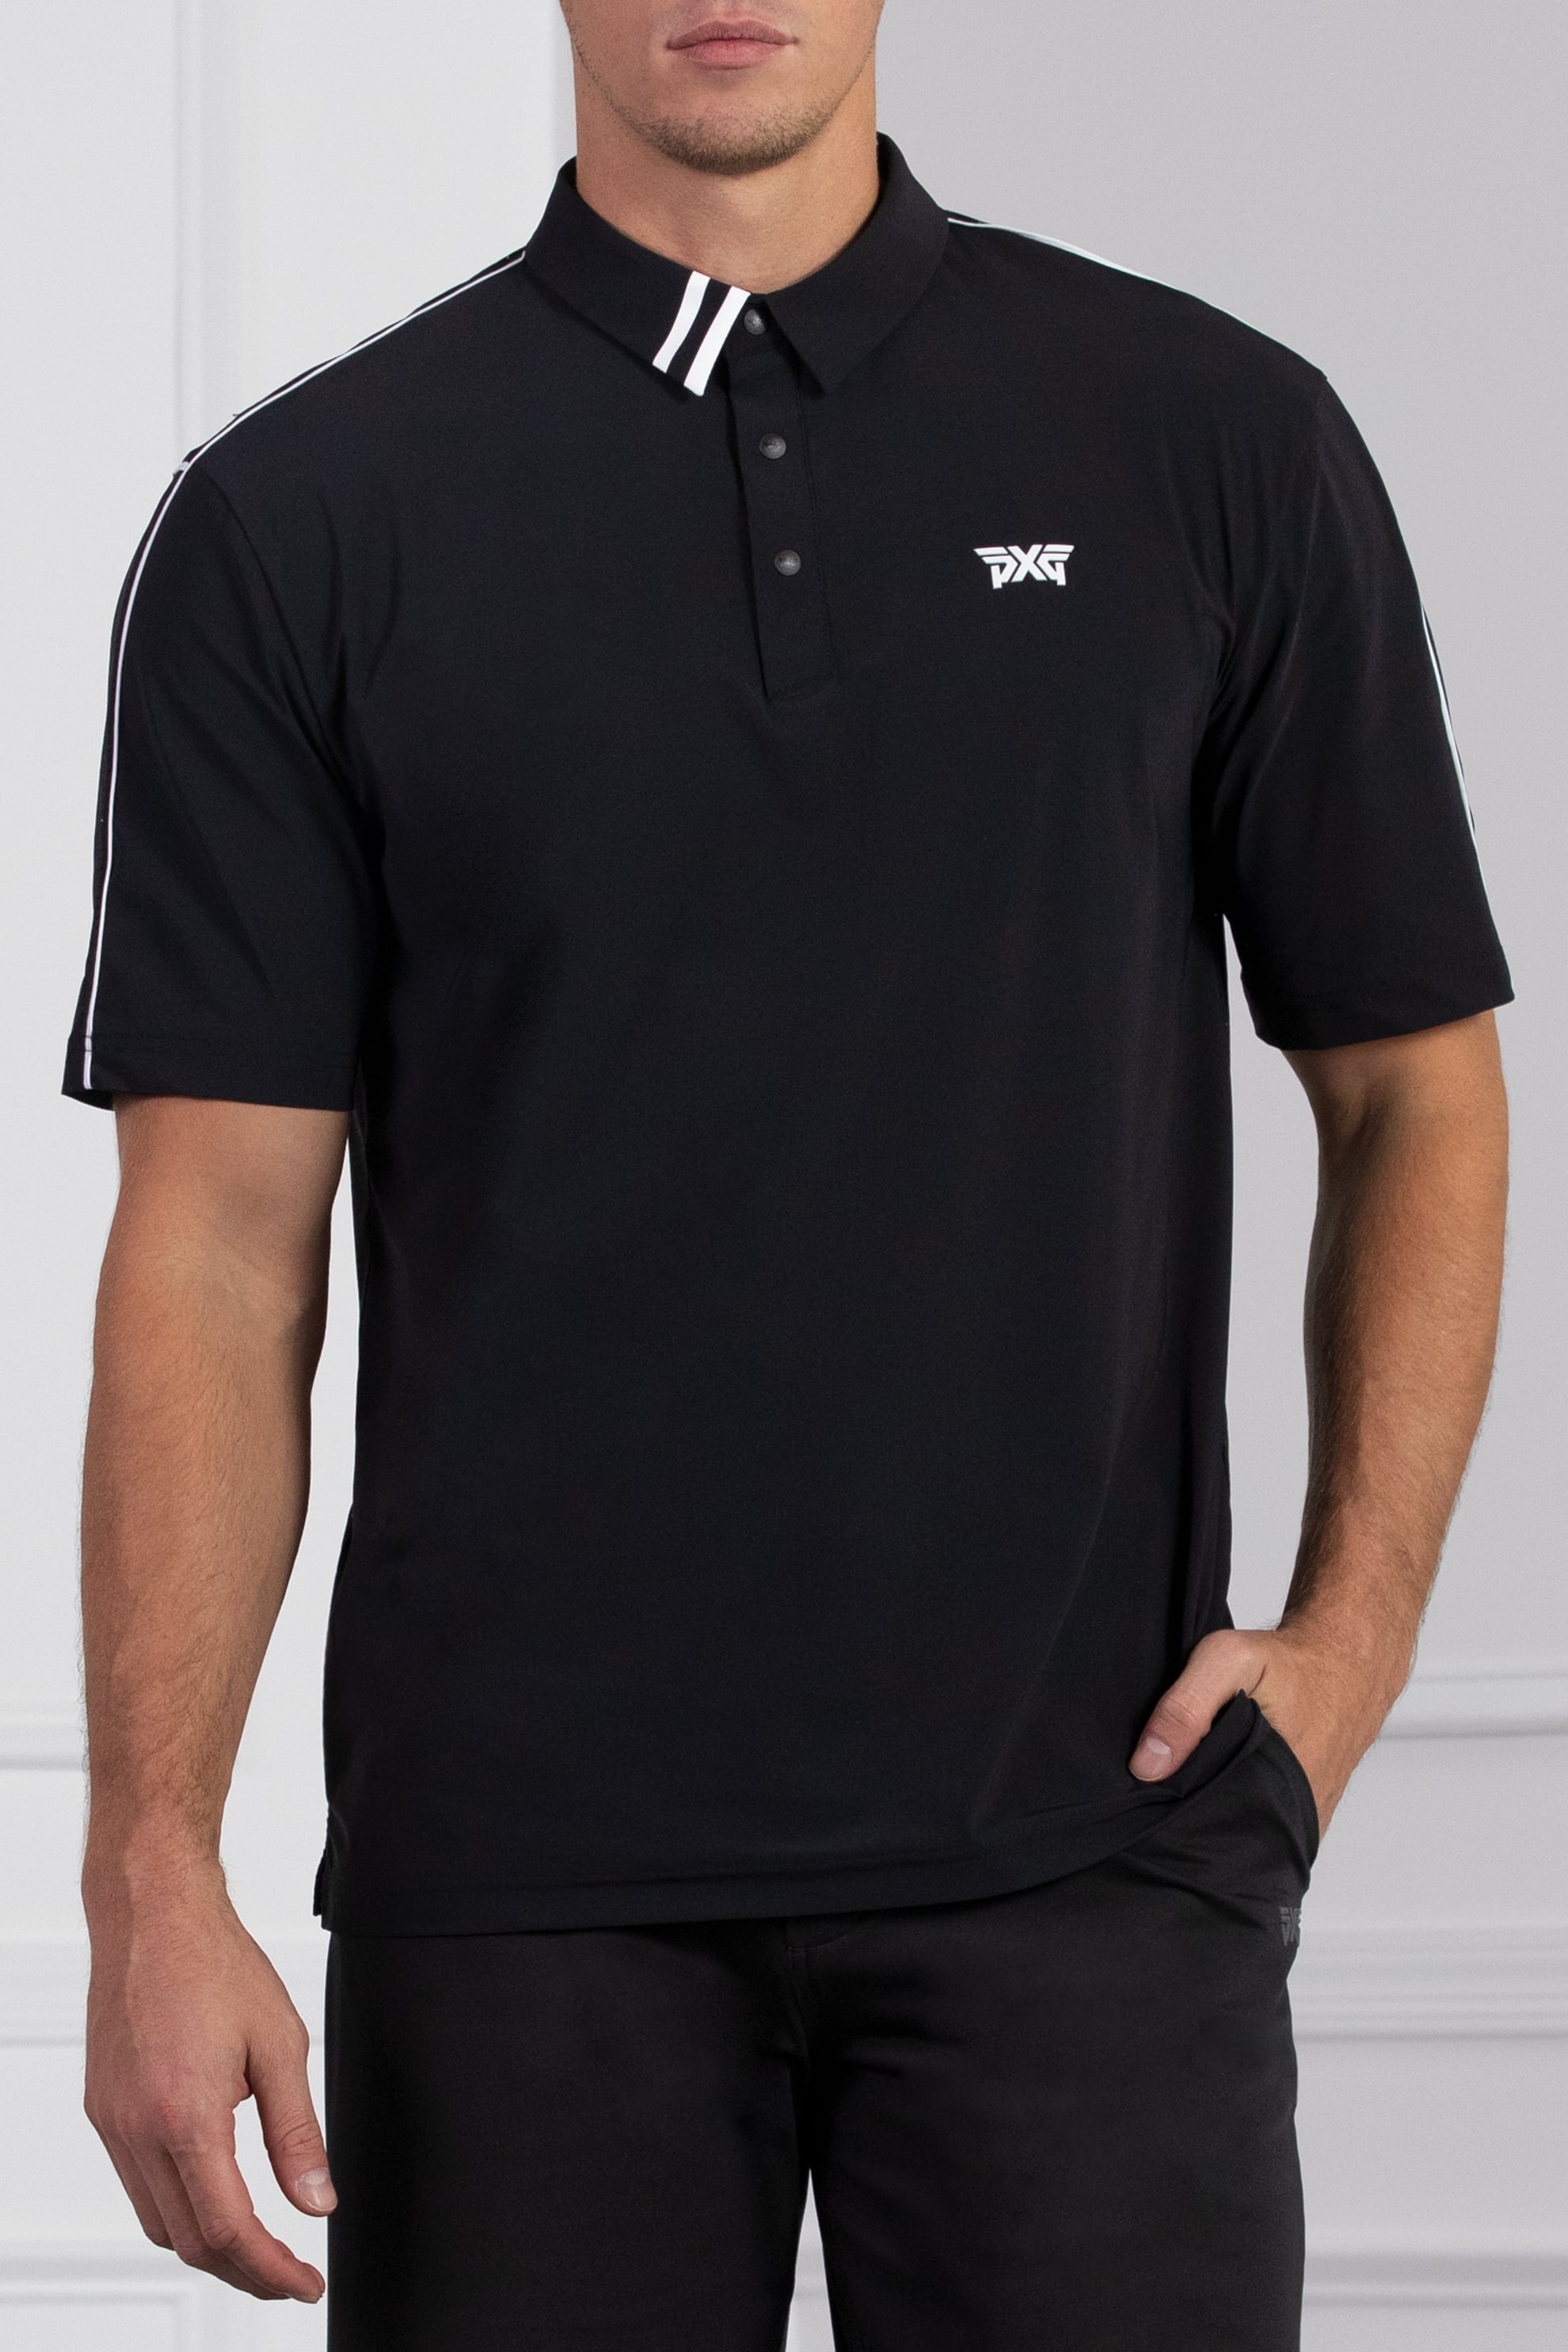 Comfort Fit Fineline Polo | Highest Golf and Shop Apparel, Quality Gear, Clubs PXG the Golf Accessories at